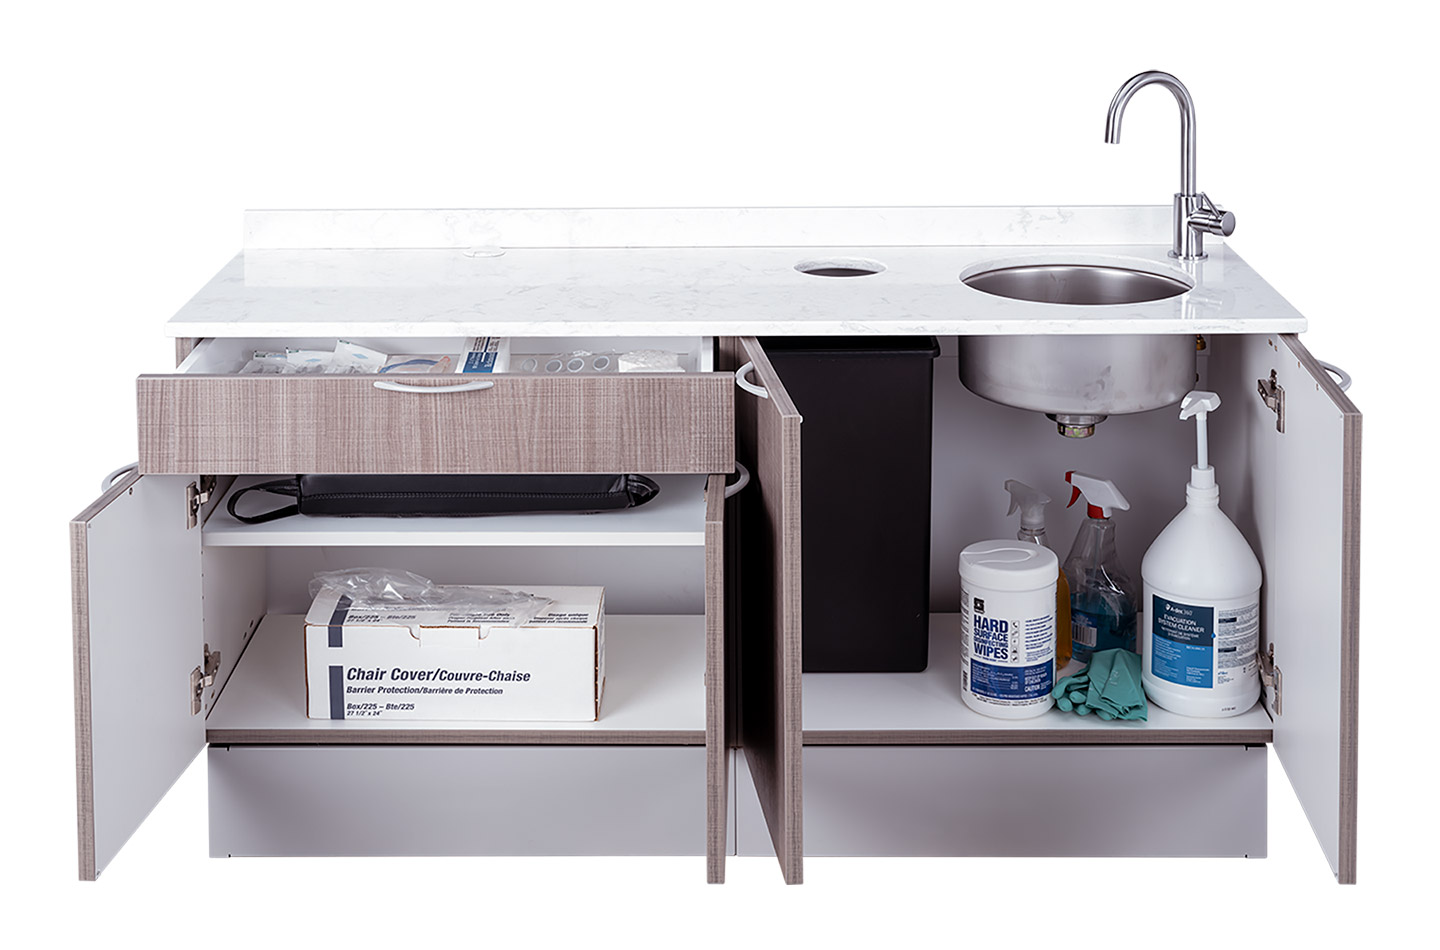 A-dec Inspire 393 side console with open drawers and cabinets